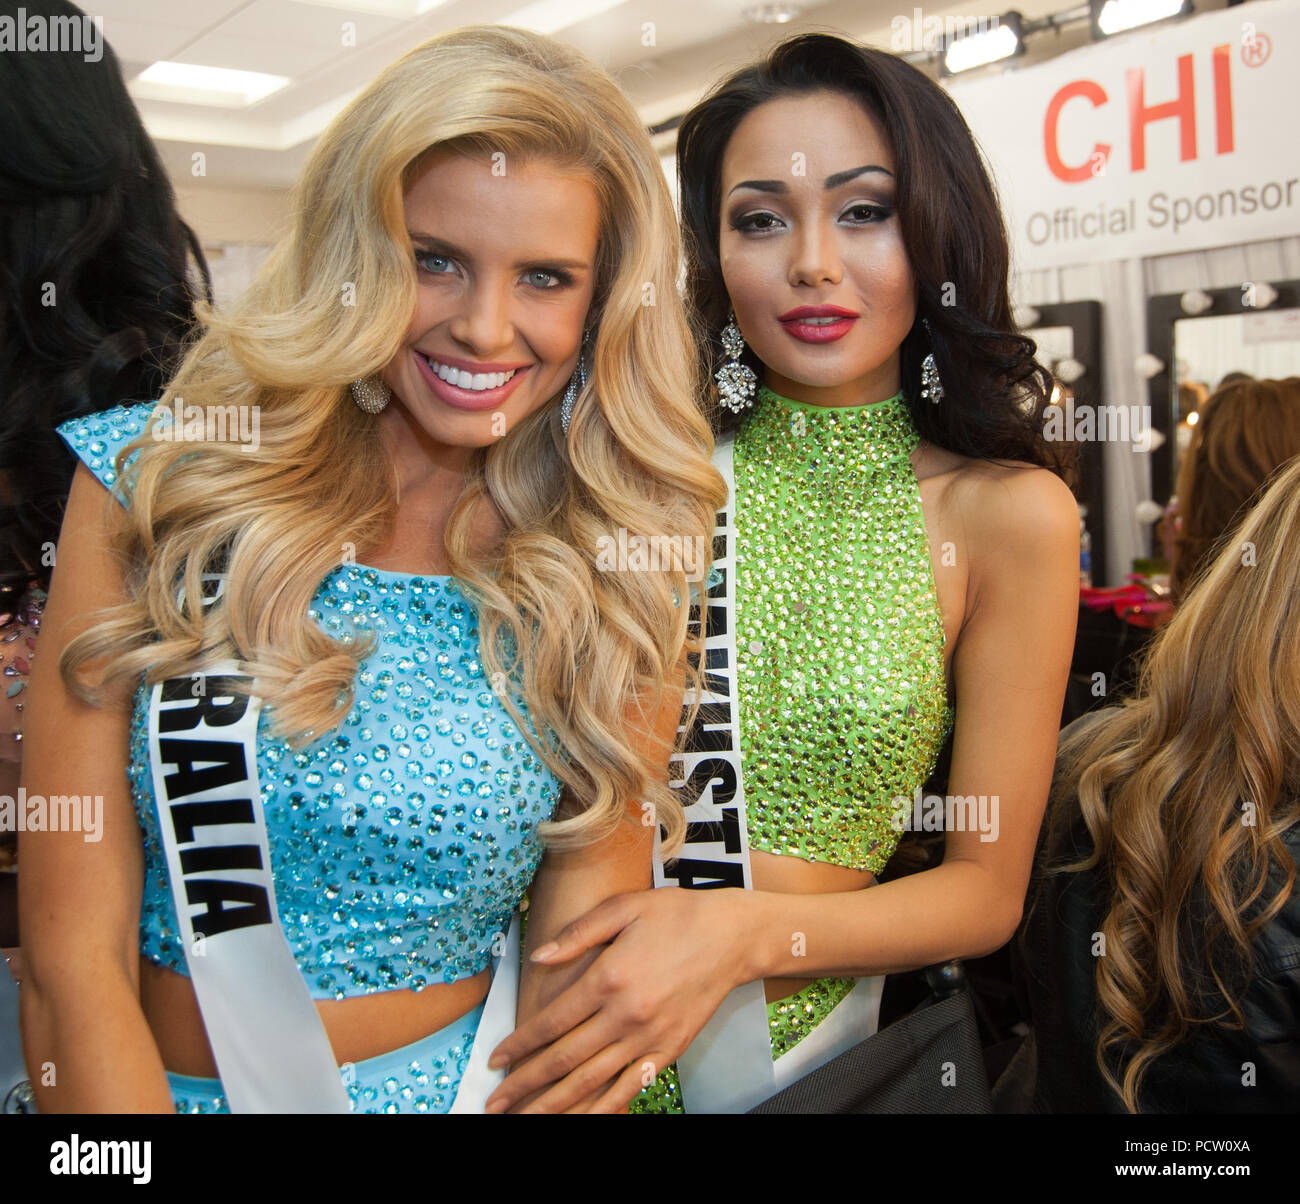 DORAL, FL - JANUARY 25:  Tegan Martin, Miss Australia, Aiday Issayeva, Miss Kazakhstan 2014 gets her makeup done by an O.P Makeup artist backstage at the 63rd Annual Miss Universe Pageant at Trump National Doral on January 25, 2015 in Doral, Florida.  People:  Tegan Martin, Miss Australia, Aiday Issayeva, Miss Kazakhstan Stock Photo